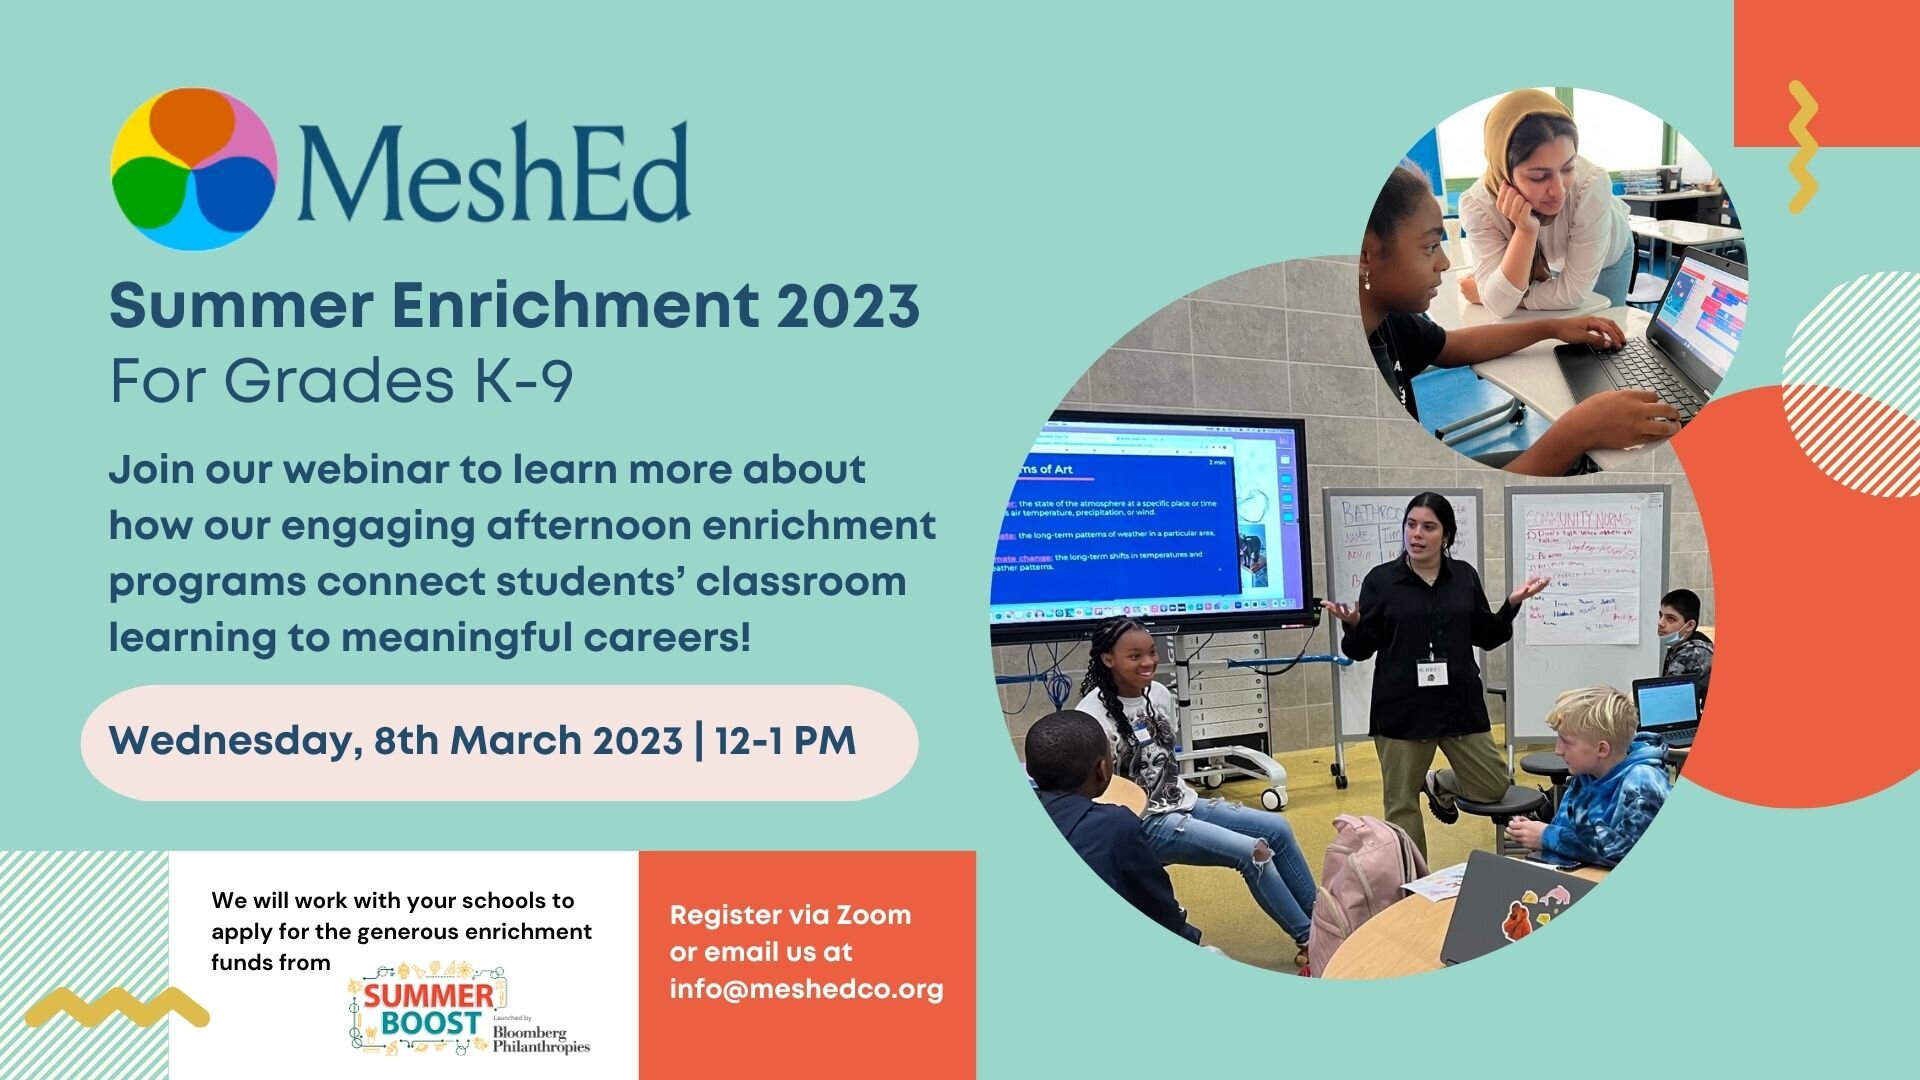 FREE WEBINAR: Learn more about MeshEd's innovative summer enrichment programing!

Wednesday, March 8th, 12-1 pm EST
Register Now: https://us02web.zoom.us/meeting/register/tZMvcOCuqjMsGtwrbr5KQ60ef_-jRTtvJQ-B

#meshed #summerenrichment #innovativeenri